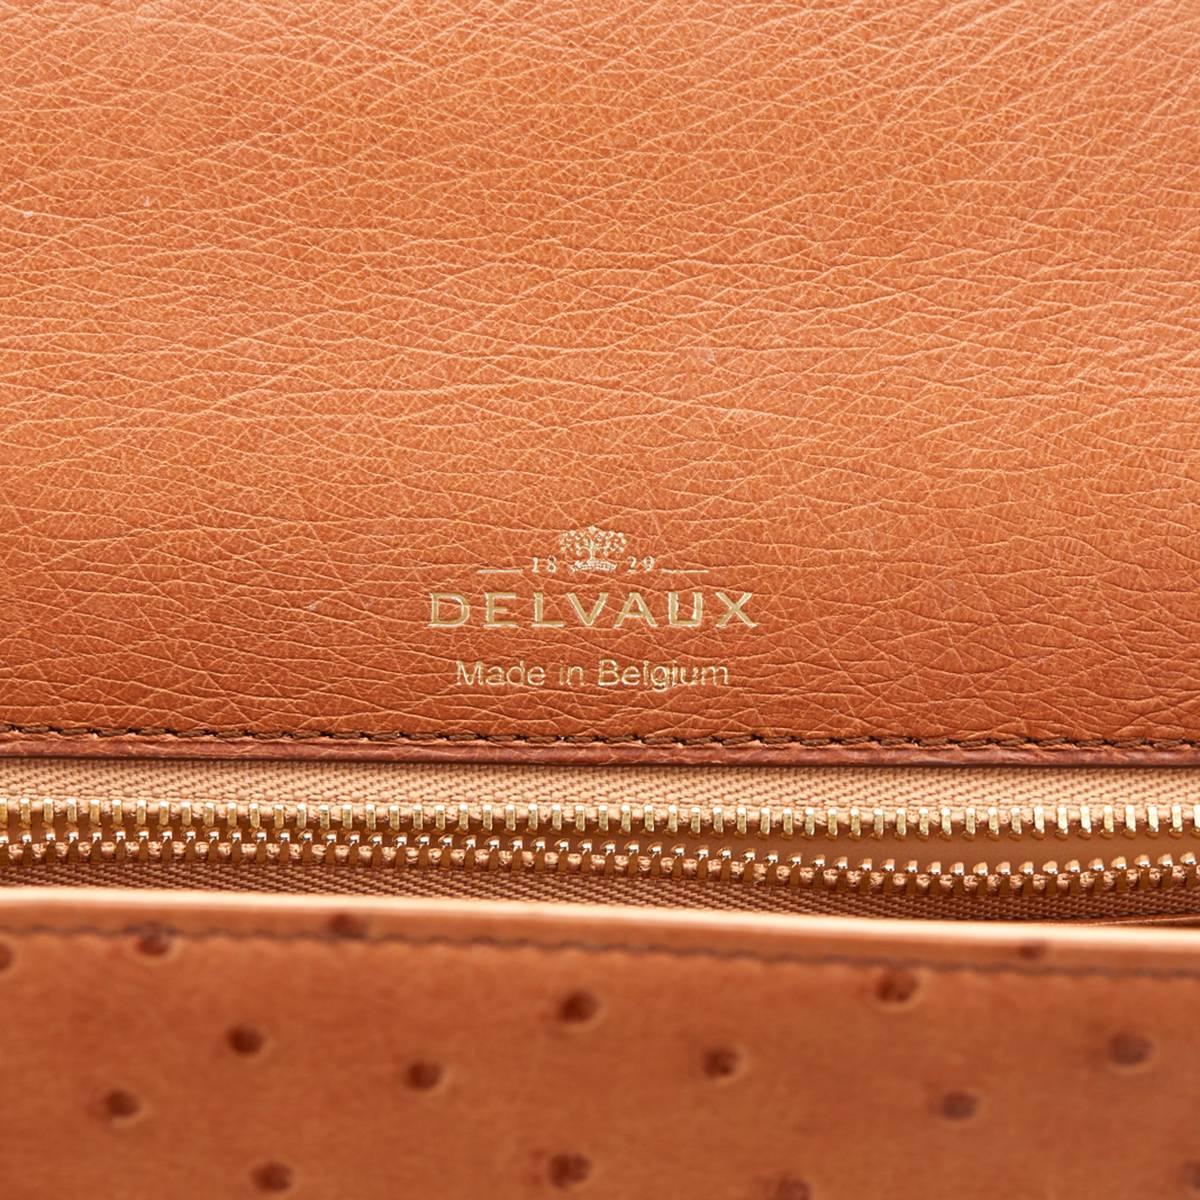 2000s Delvaux Tan Ostritch Leather Tempete MM  4